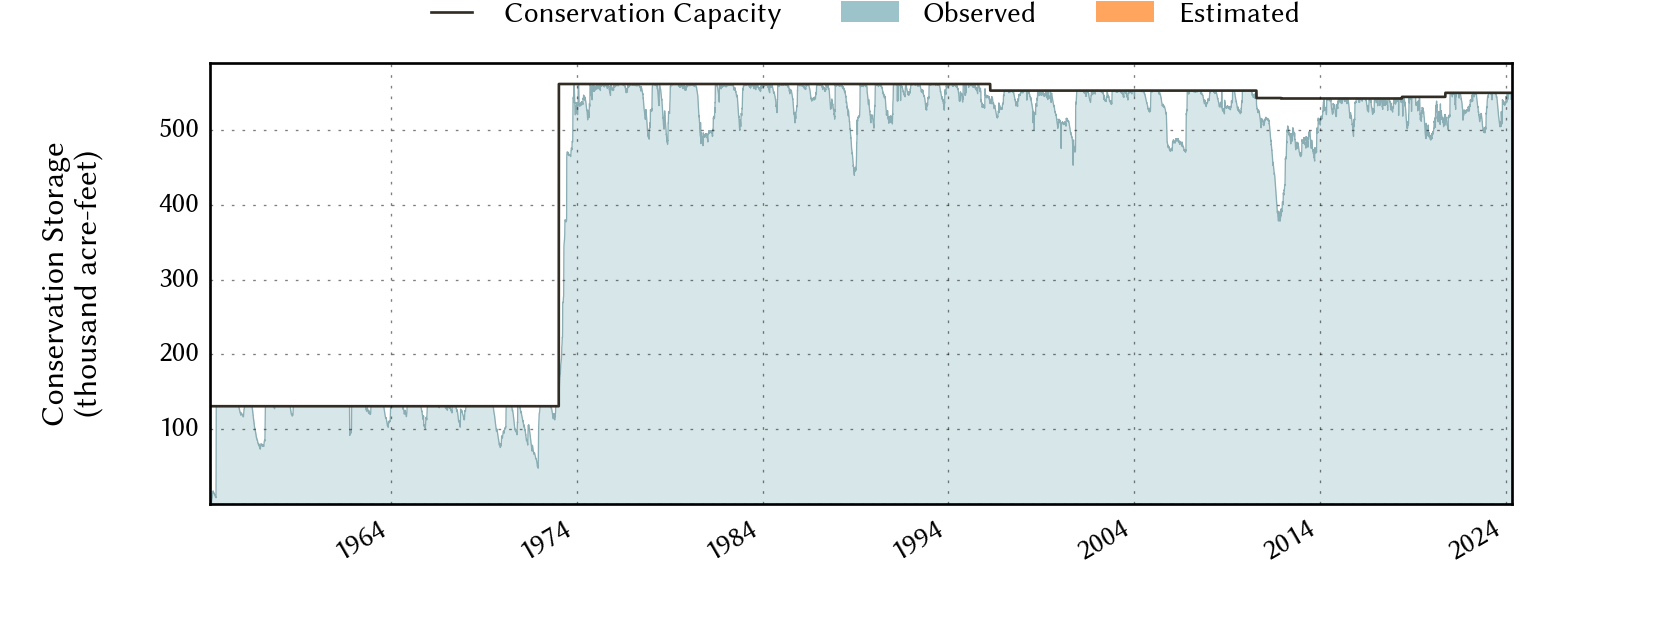 plot of storage data for the entire period of record